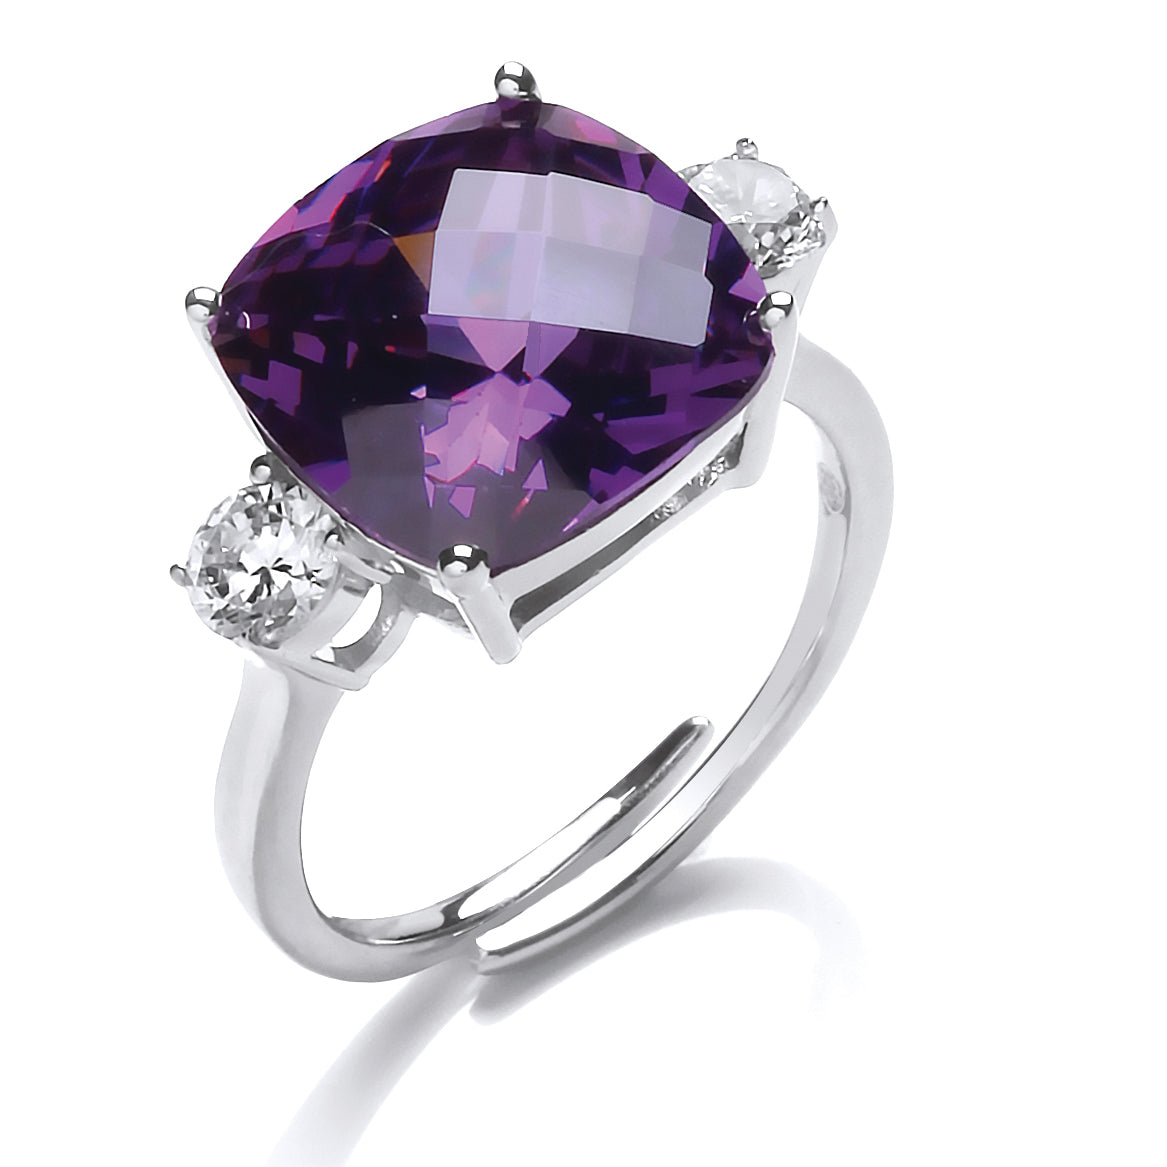 Silver  Purple Cushion CZ Shoulder-Set 4 Claw Solitaire Ring - GVR794AMY